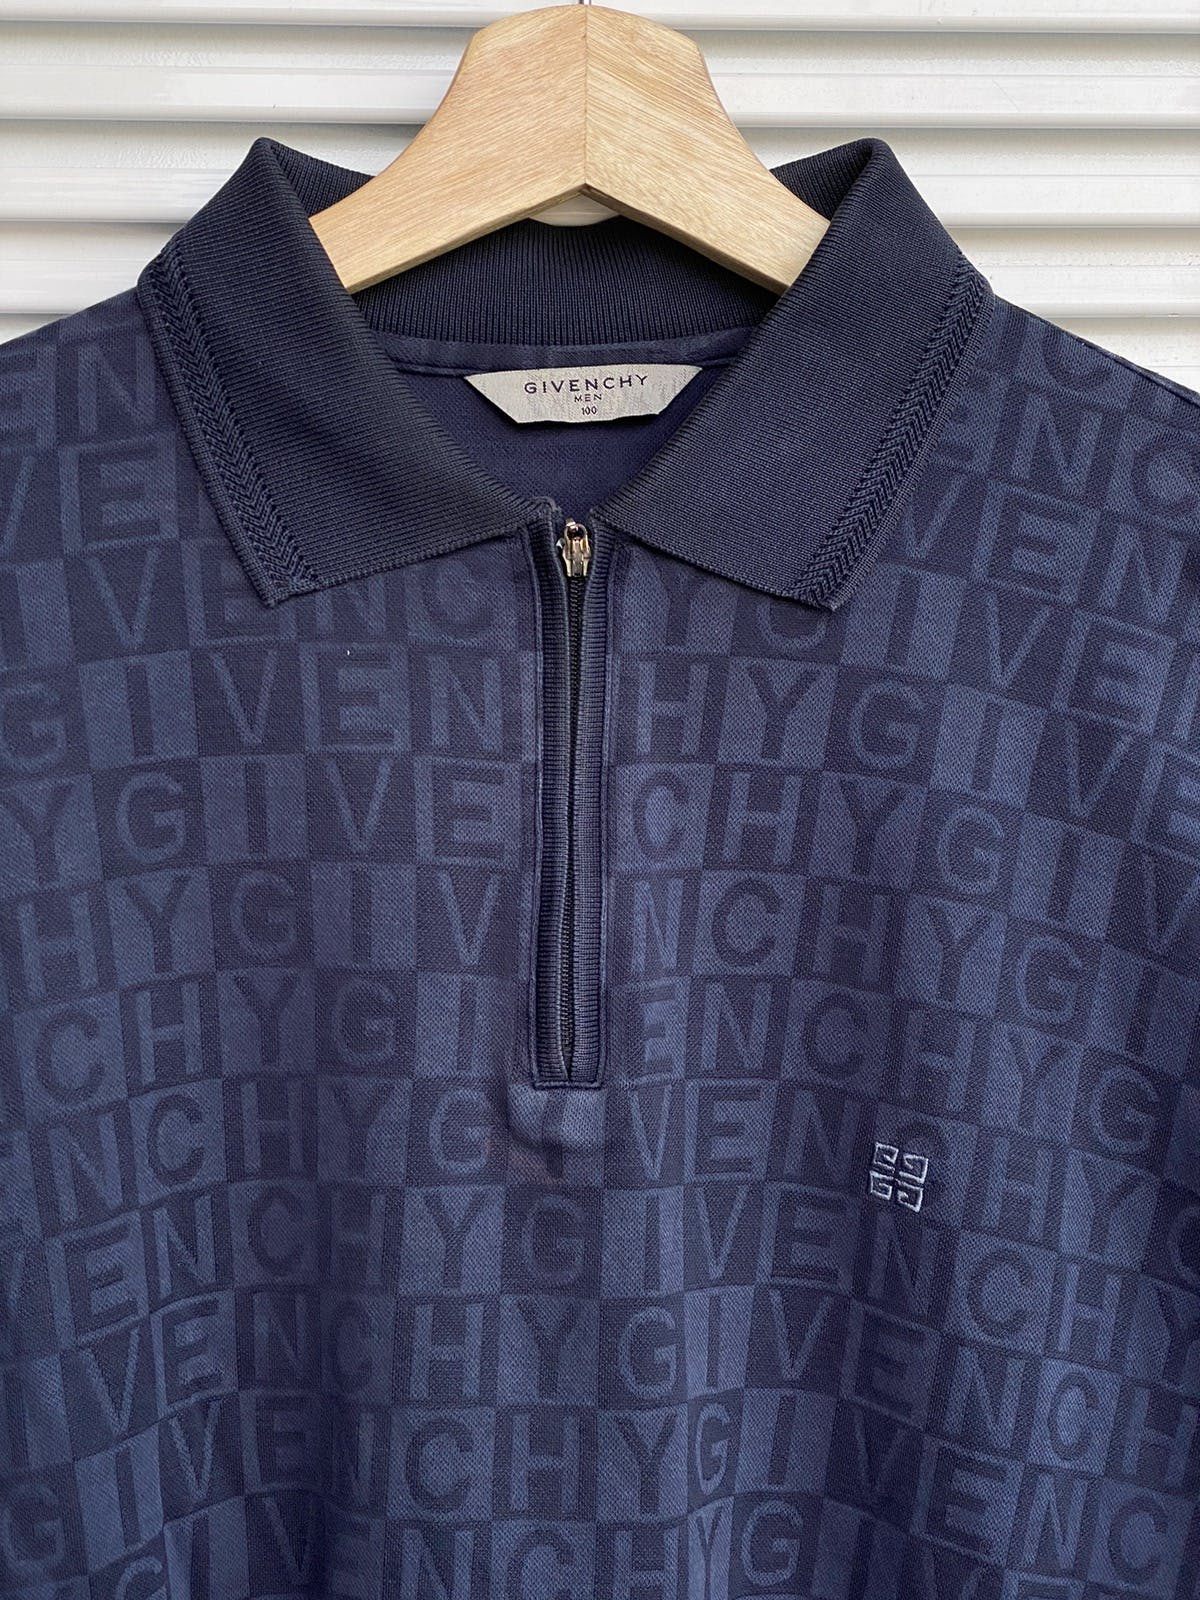 Vintage Givenchy Polo Longsleeves - 3